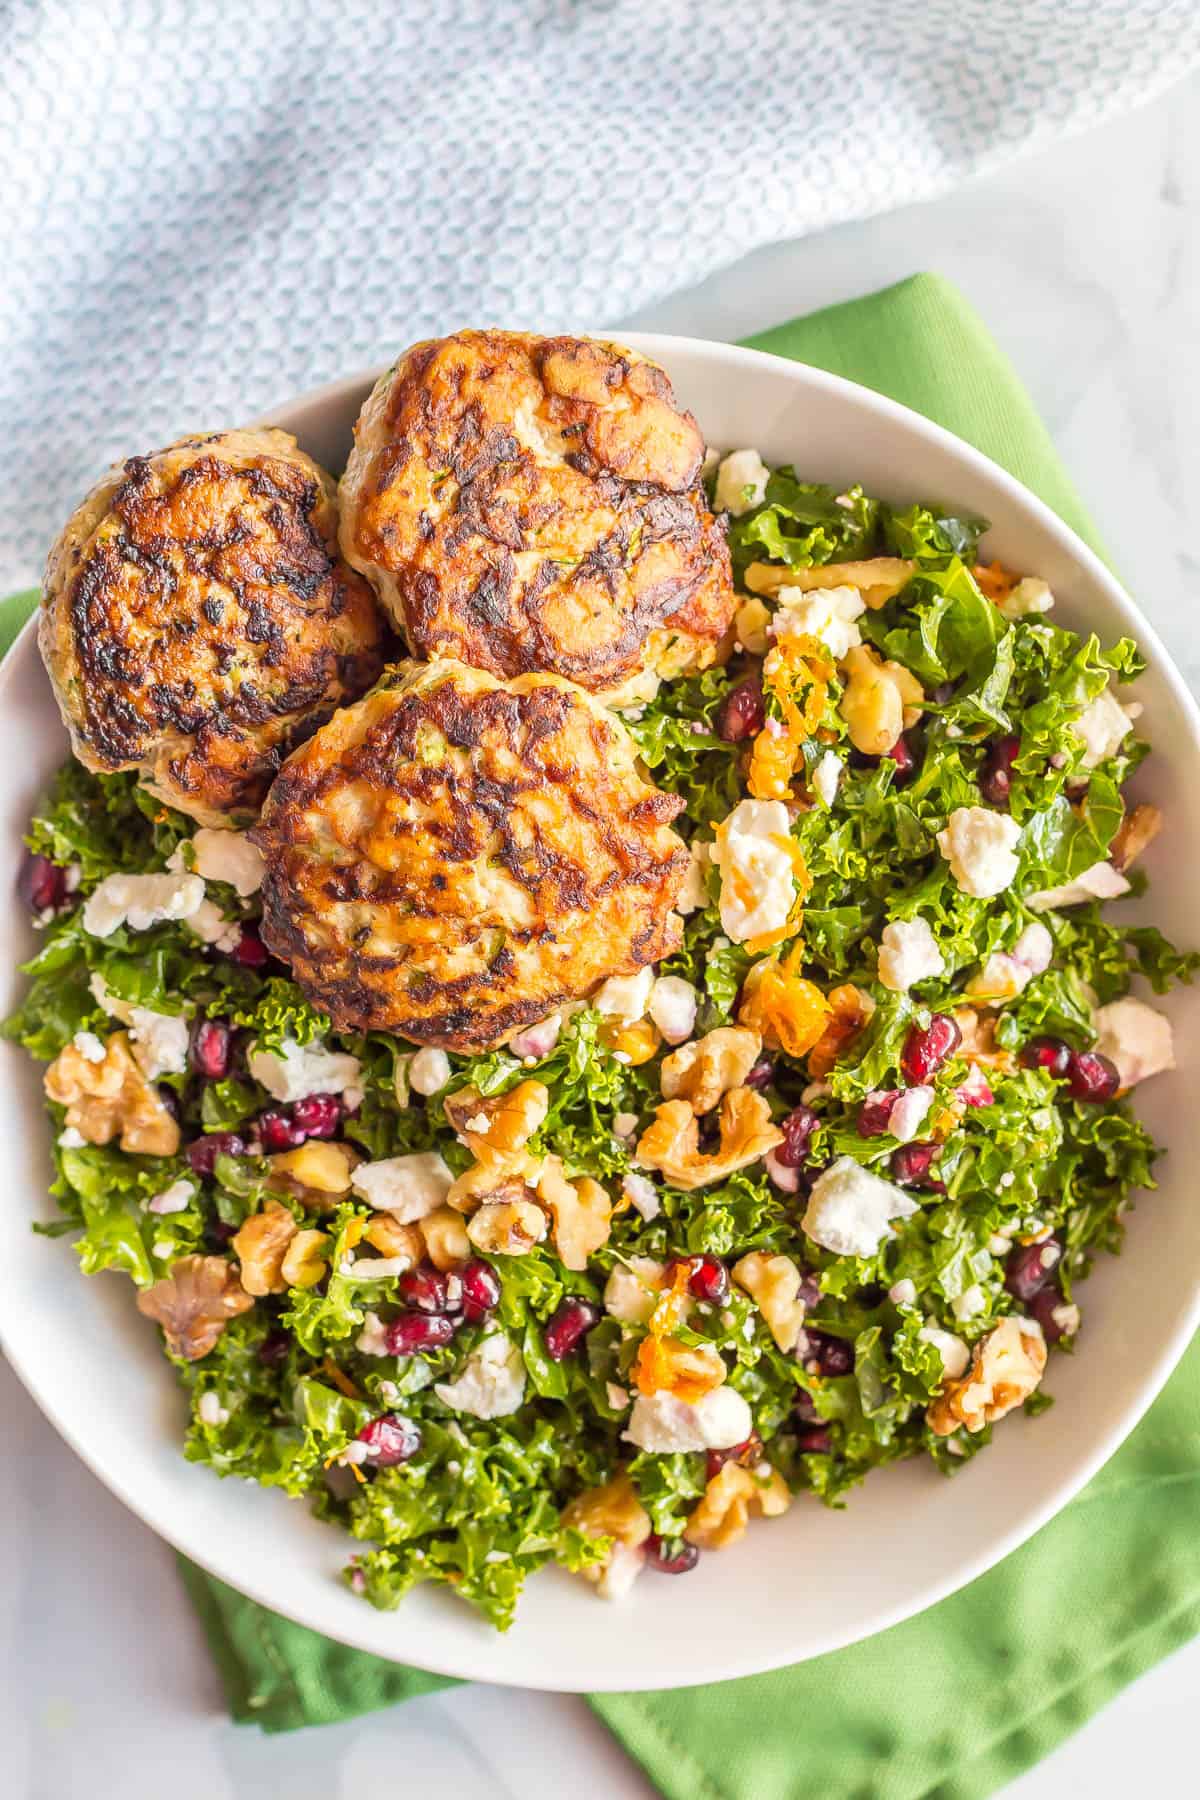 A massaged kale salad with feta, walnuts and three spicy chicken patties on top.